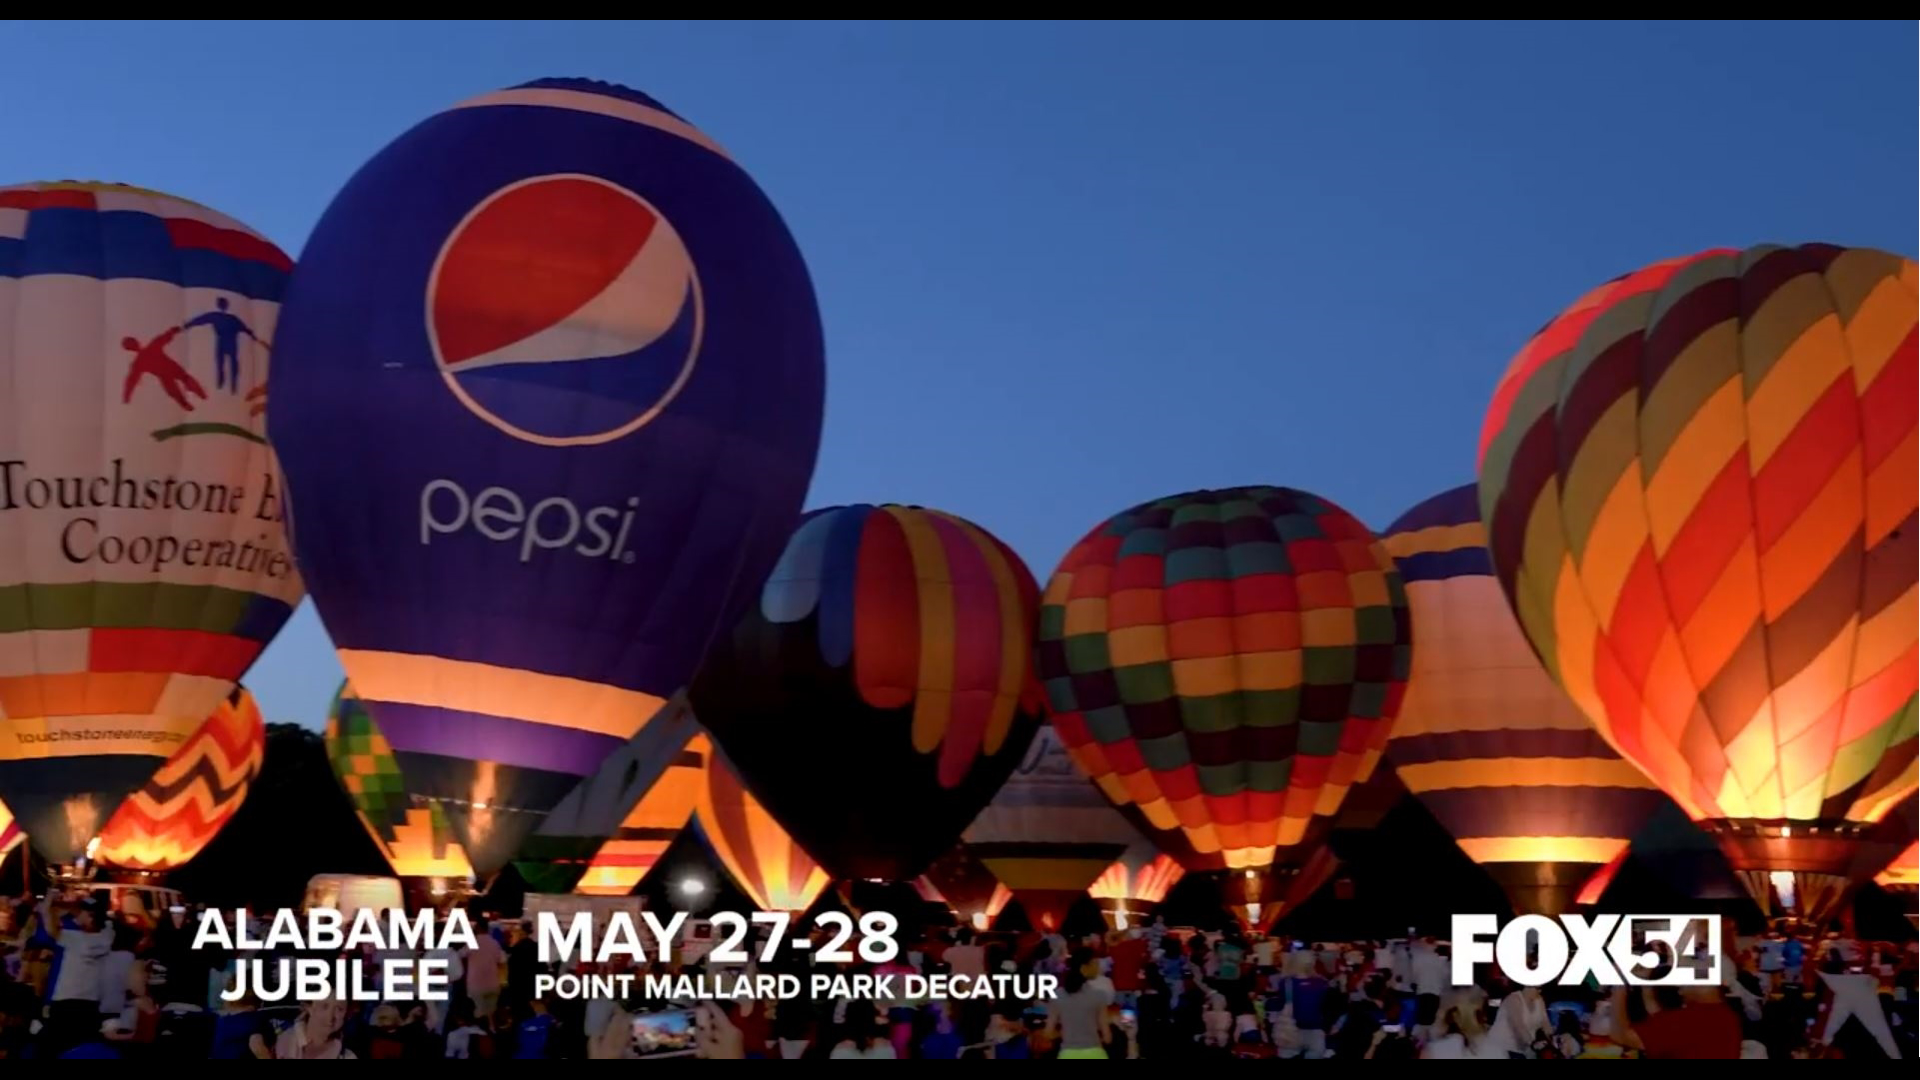 FOX54 will be hanging out at Alabama Jubilee in Decatur May 27-28, 2023.